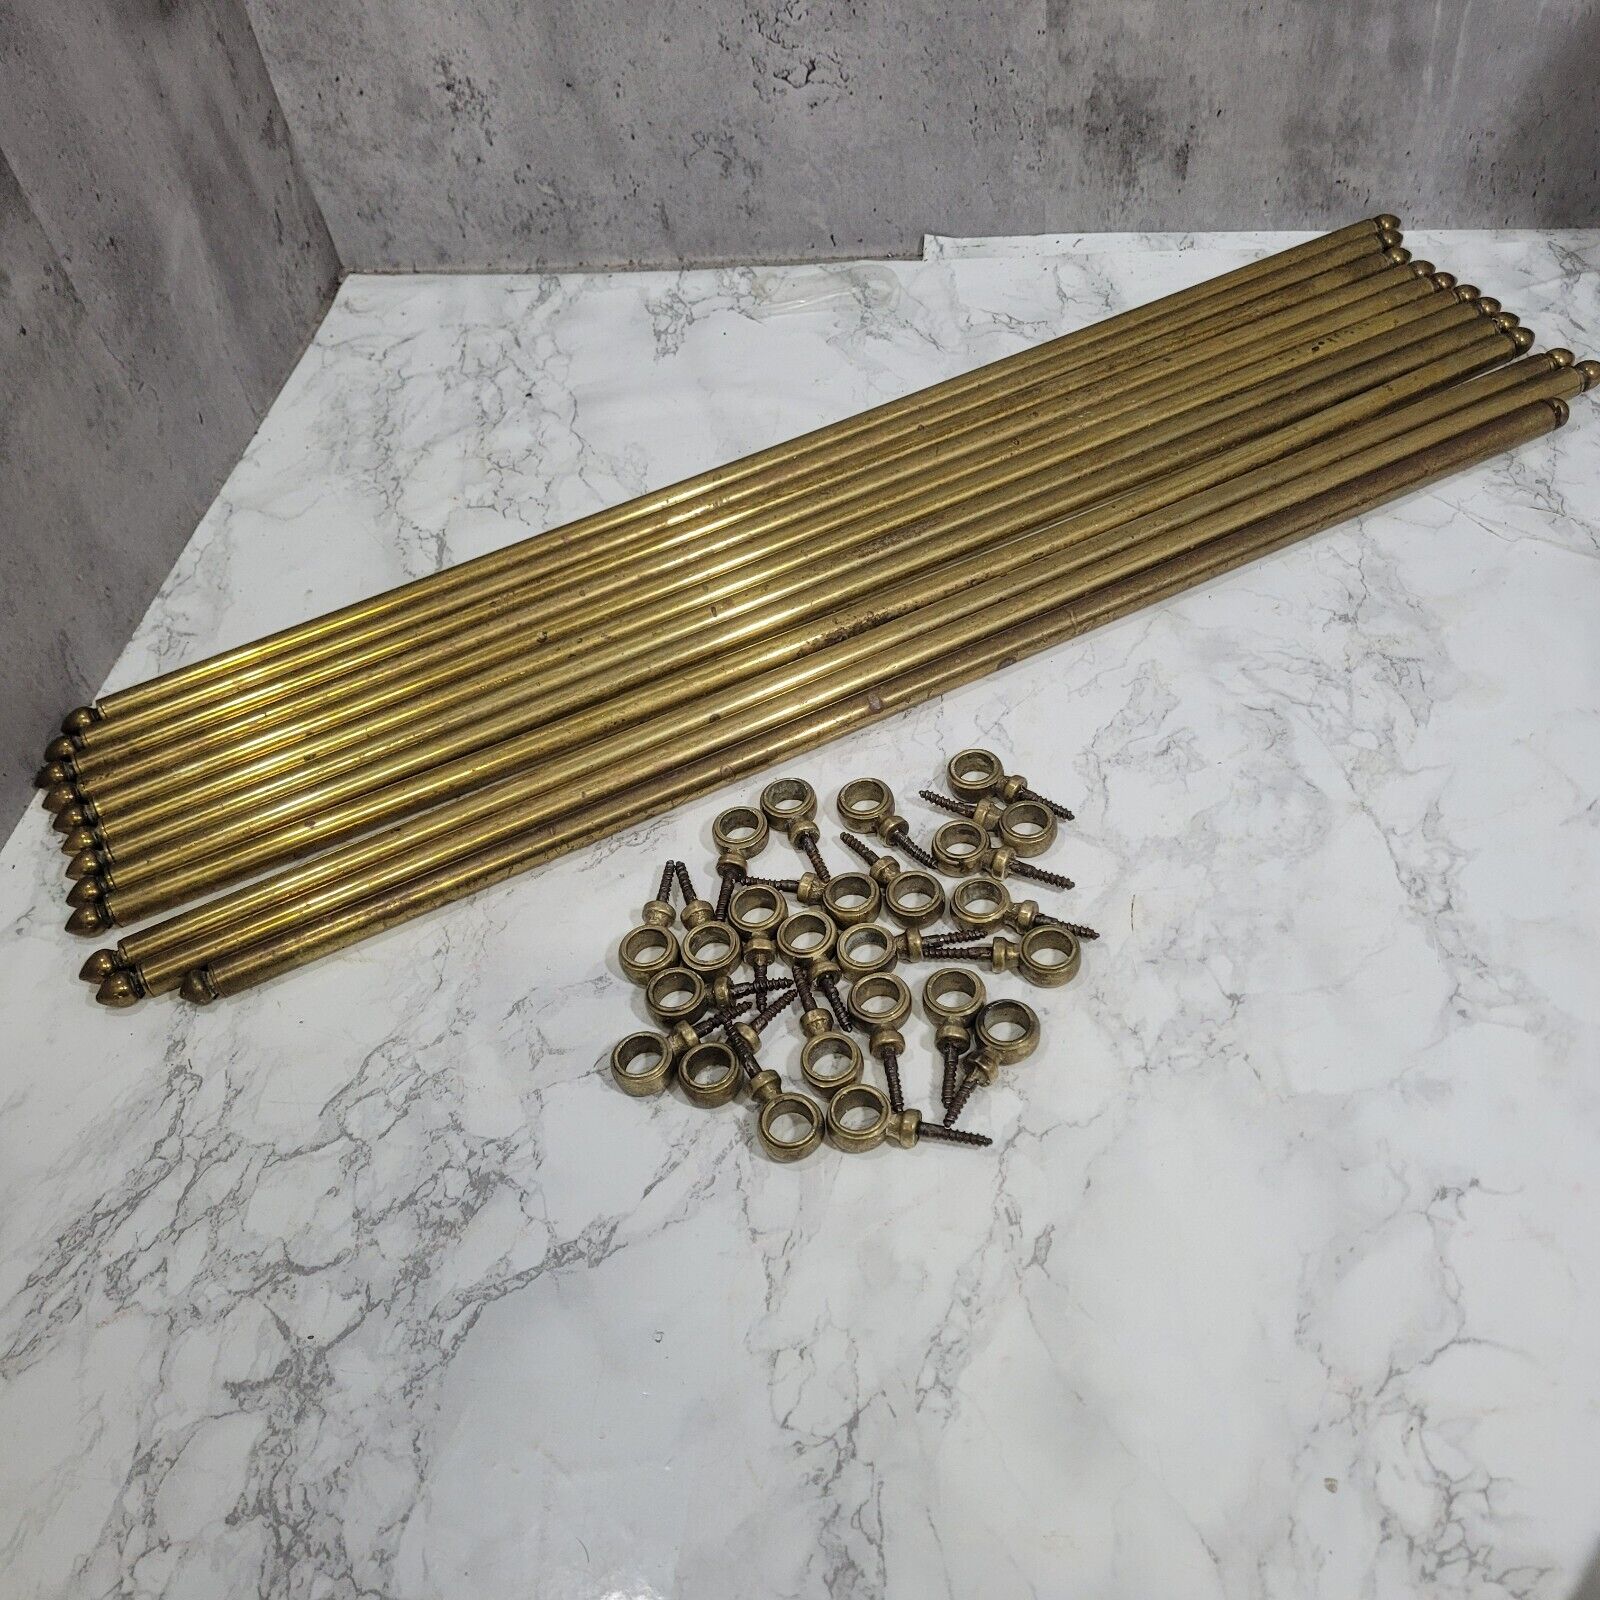 Set of 12 Vintage Brass stair carpet rods with brackets for stair runners